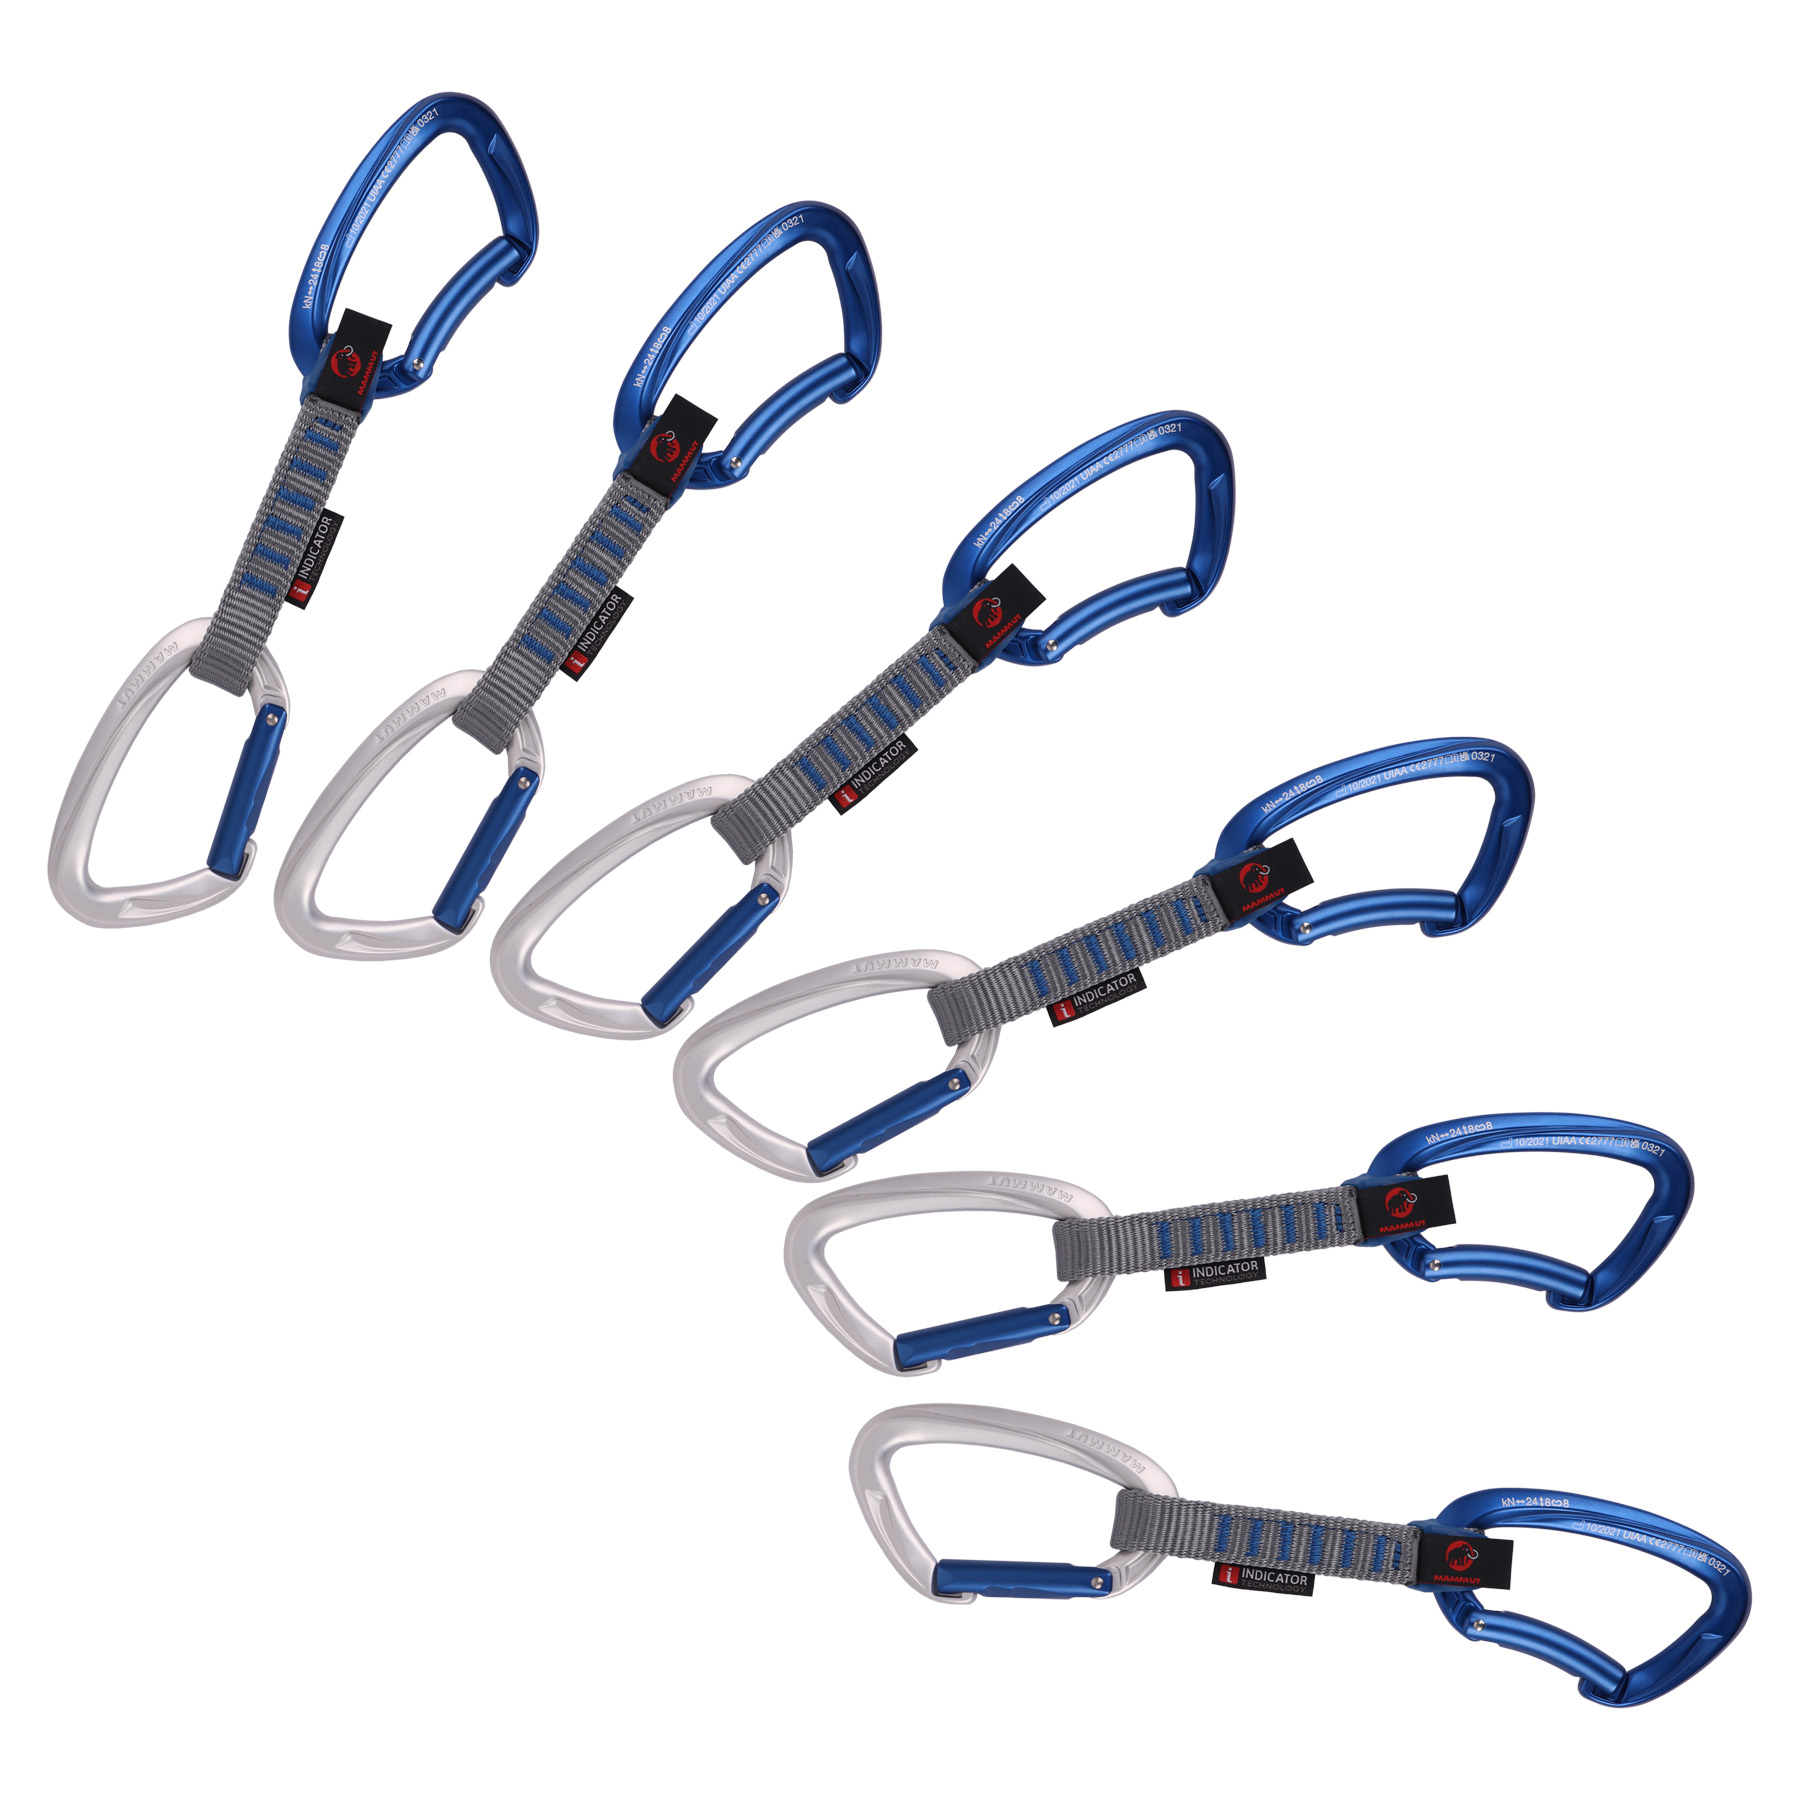 Picture of Mammut Crag Keylock 10 cm Indicator Quickdraw Set - 6-Pack - silver-ultramarine